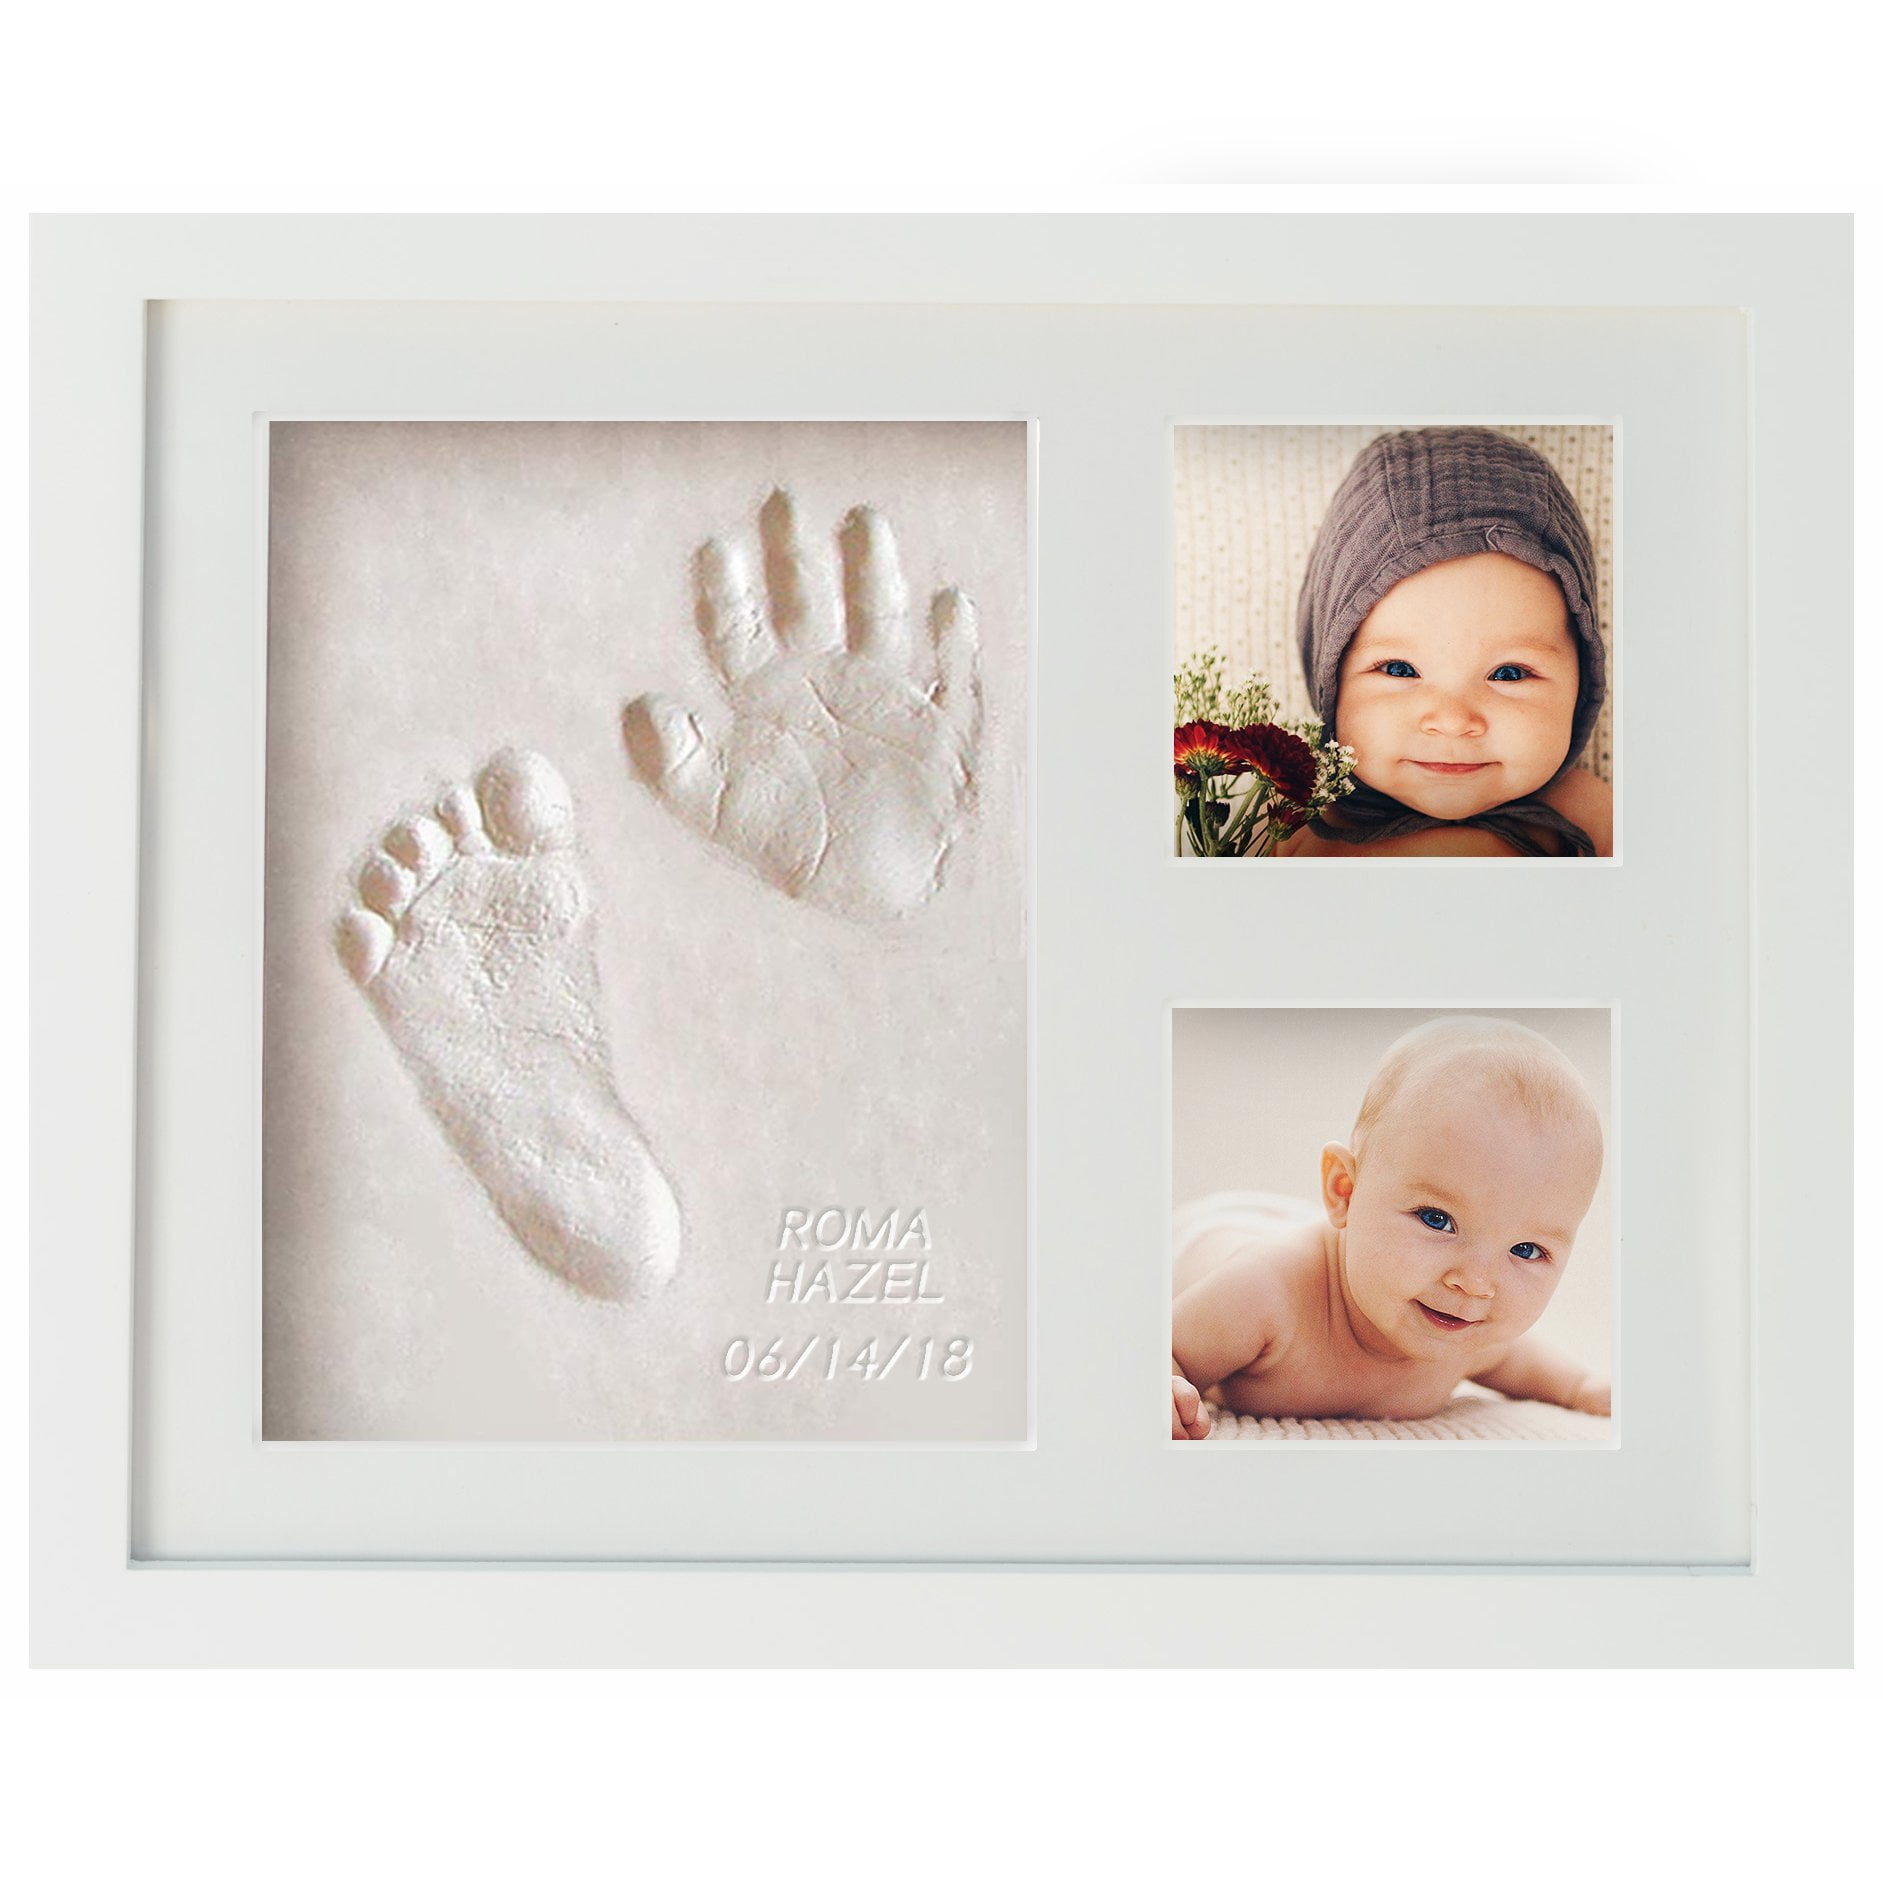 Quality Wood Frame with Safe Acrylic Glass Elsatsang Best Baby Handprint and Footprint Photo Frame Kit Baby Keepsake Preserves Priceless Memories,Non Toxic and Safe Clay White 